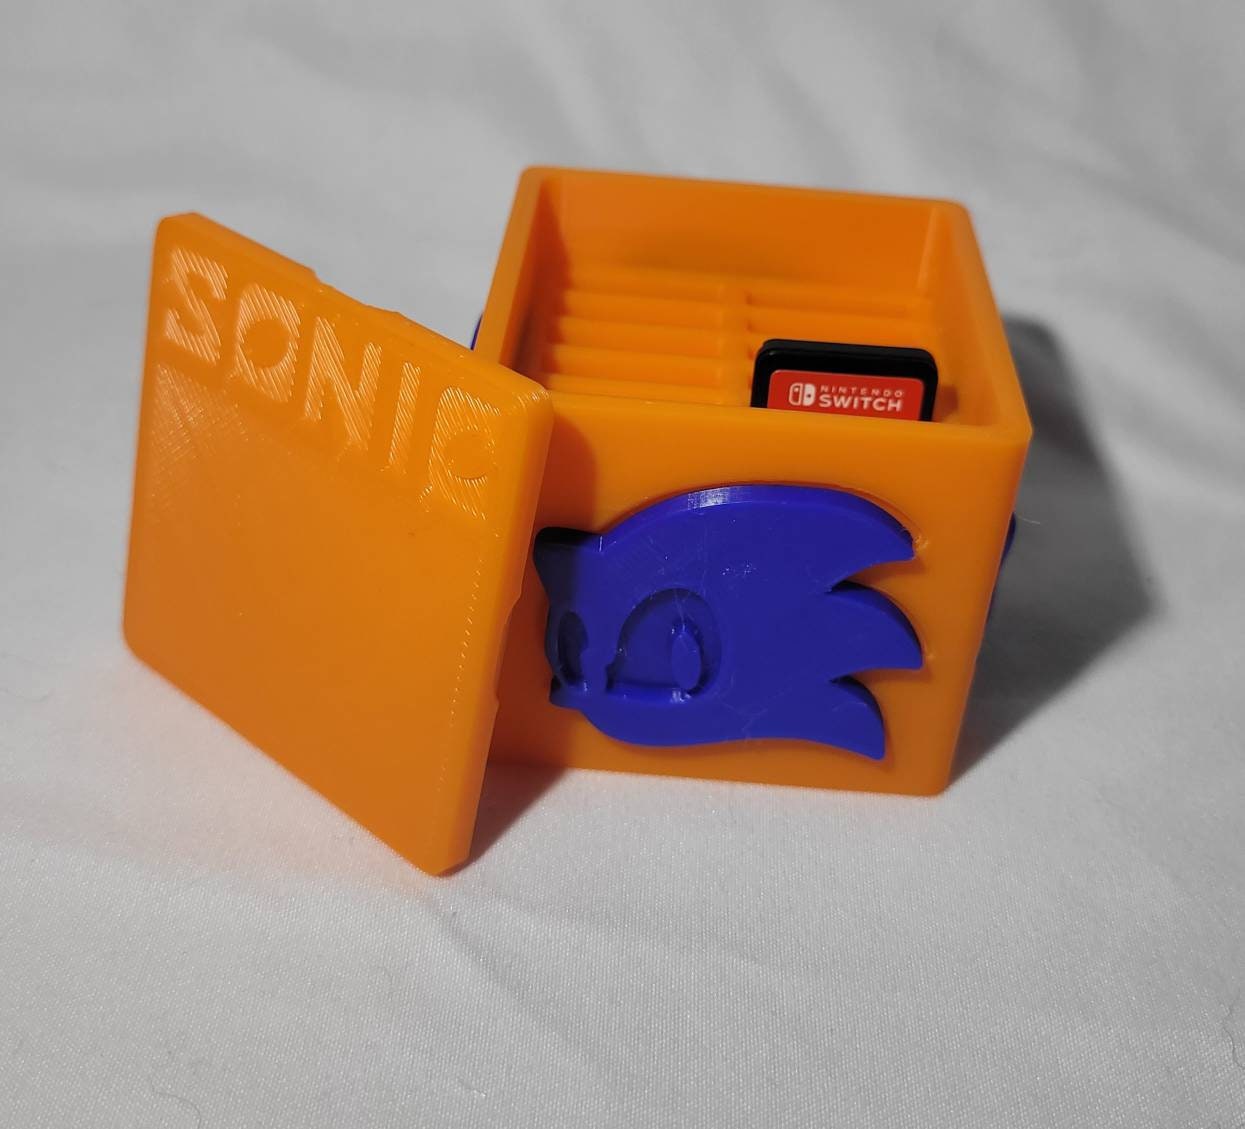 Sonic Switch Accessory Kit